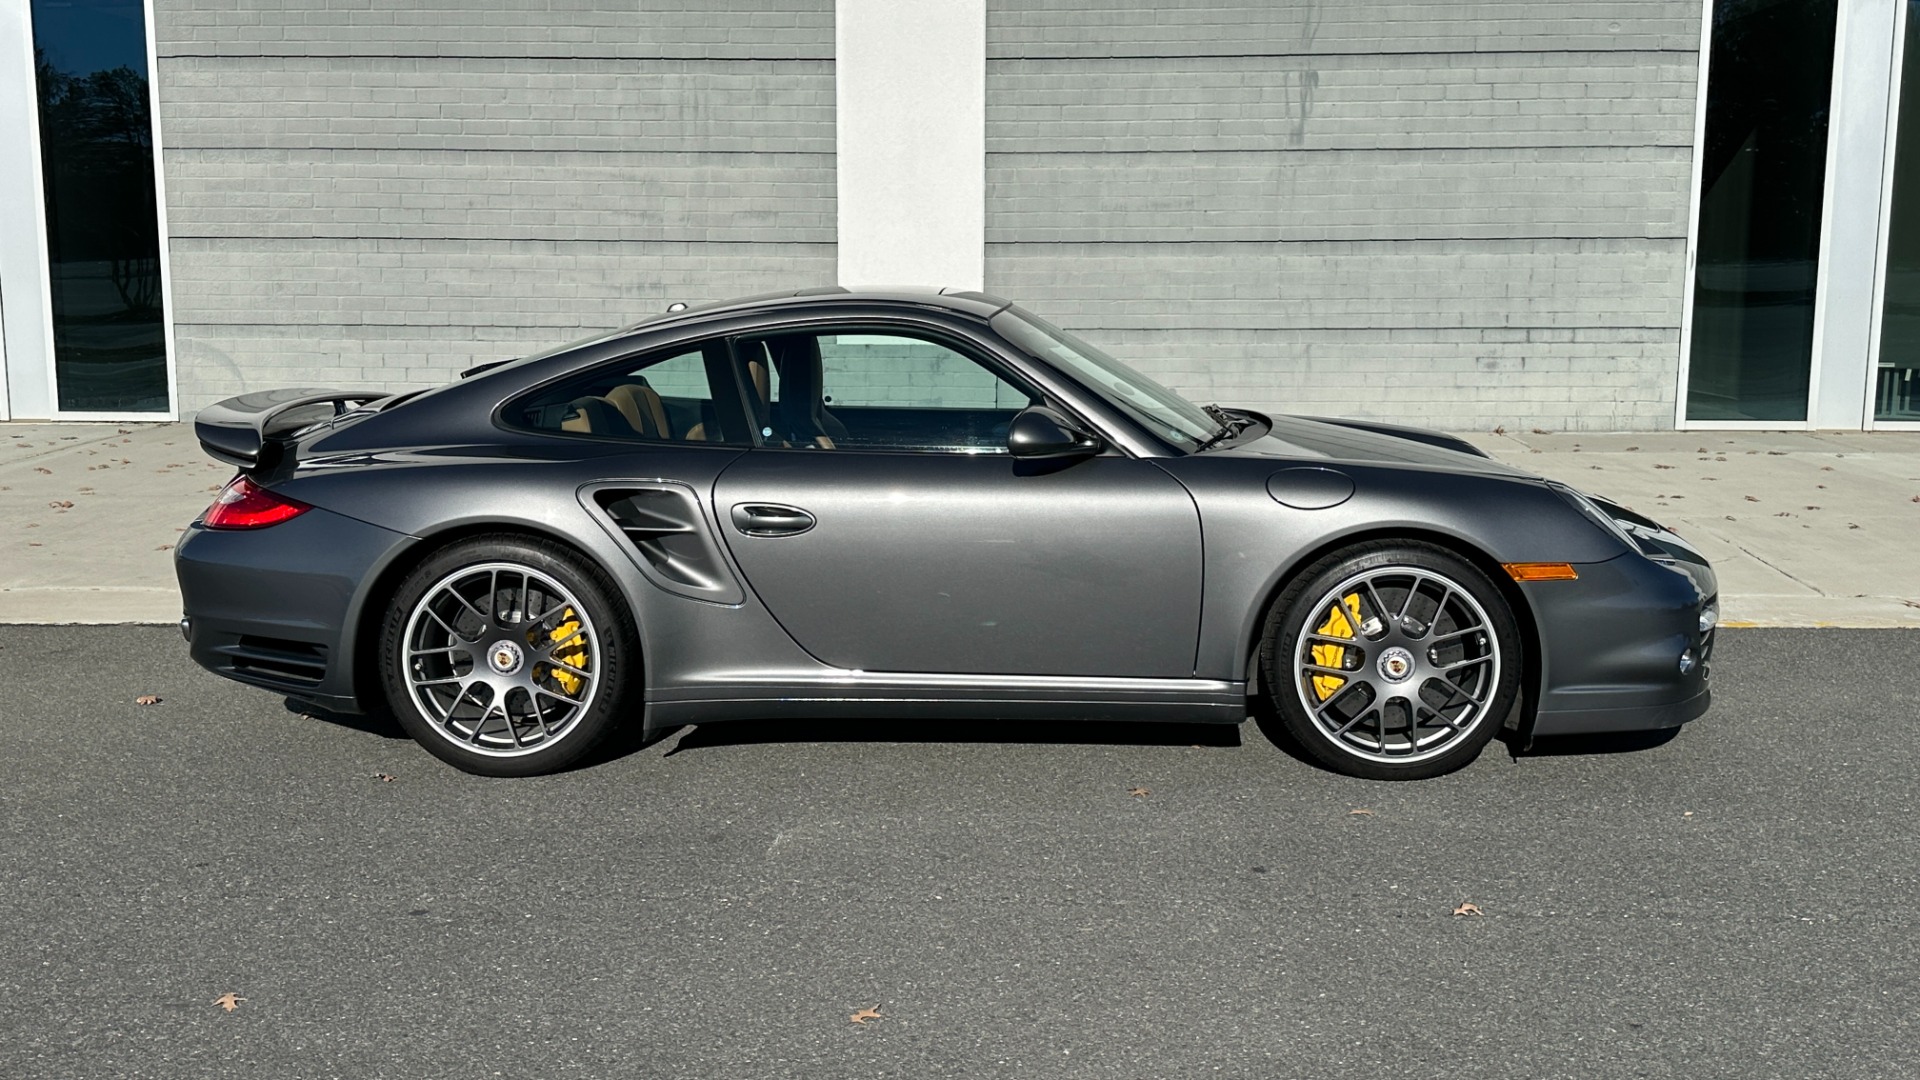 Used 2012 Porsche 911 TURBO S / CENTER LOCK WHEELS / FULL LEATHER INTERIOR / YELLOW CALIPERS / PA for sale Sold at Formula Imports in Charlotte NC 28227 6